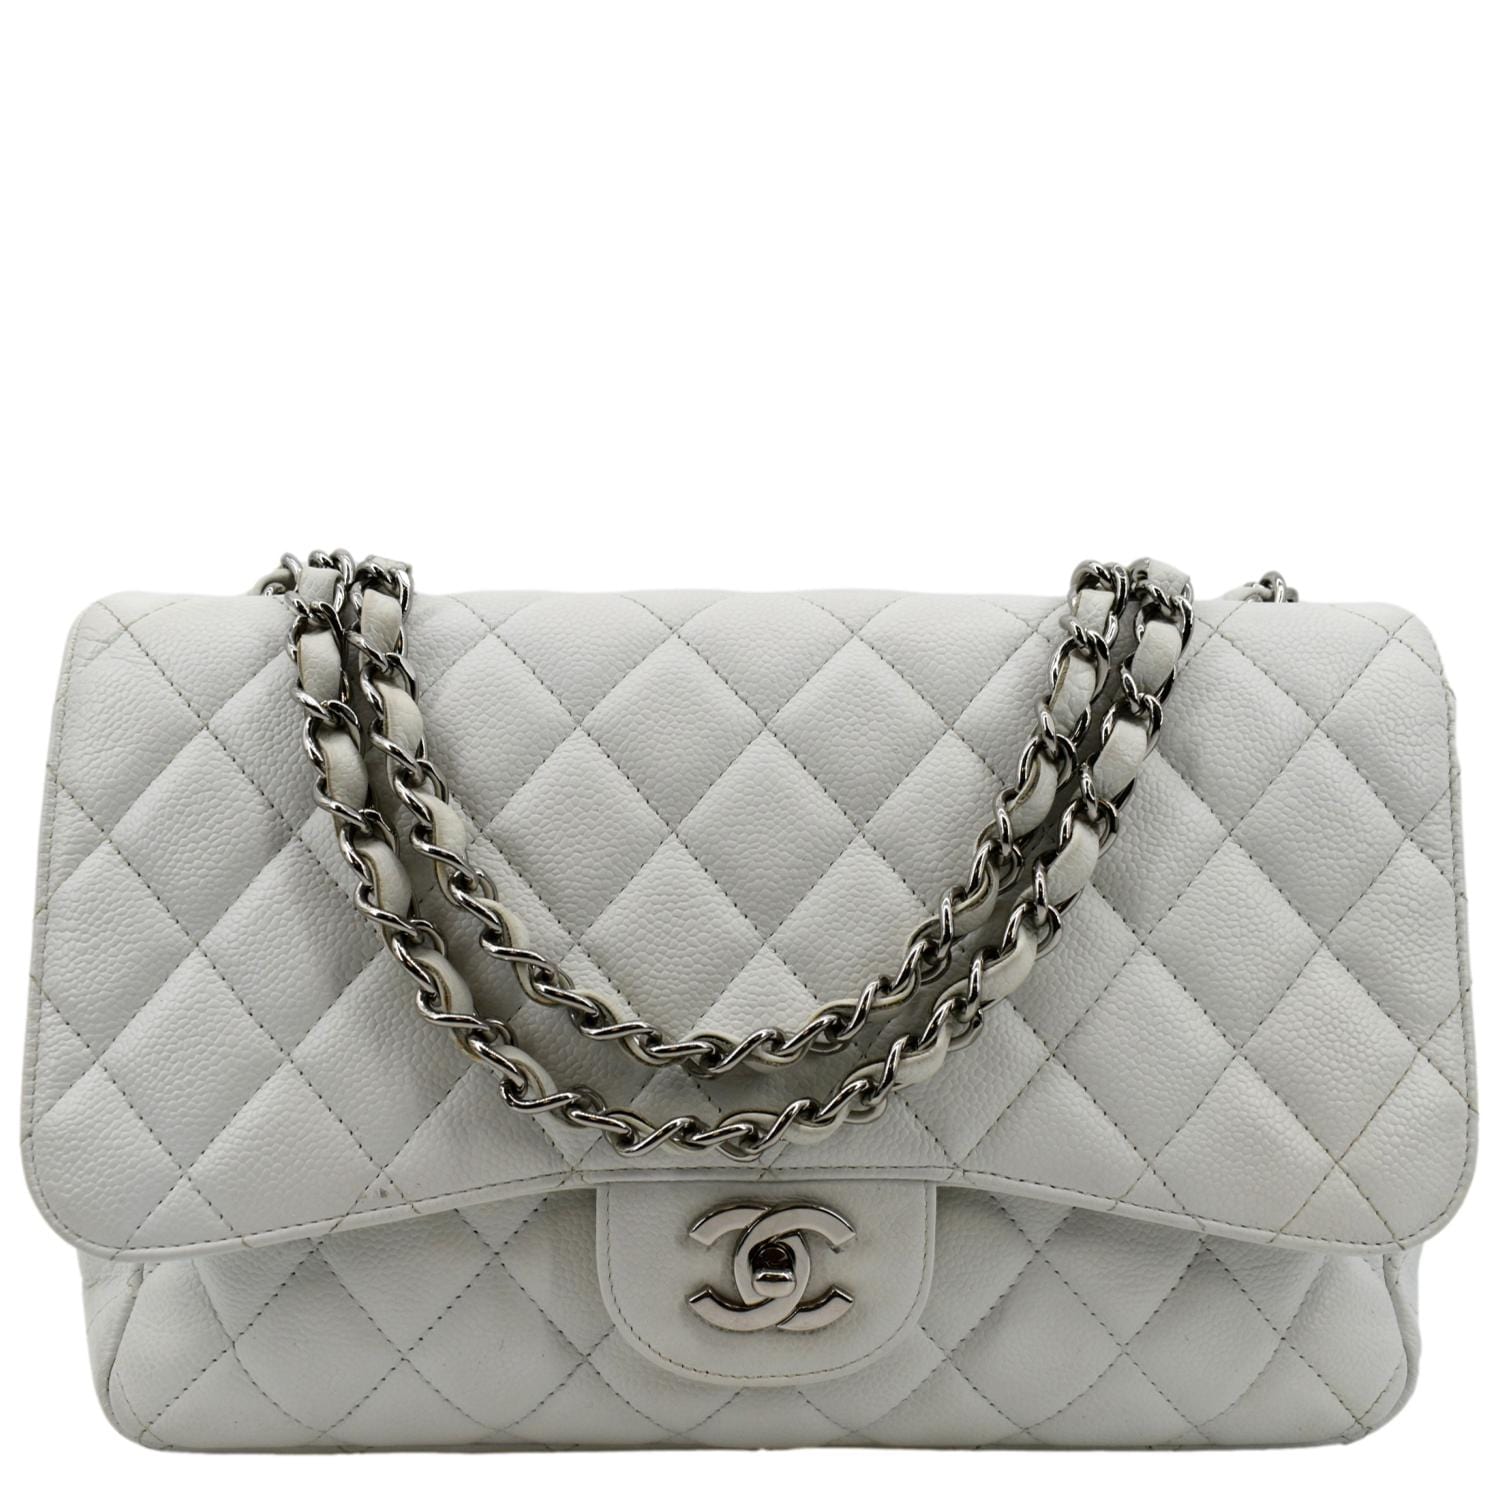 CHANEL Classic Jumbo Flap Caviar Leather Shoulder Bag White - Hot Deal